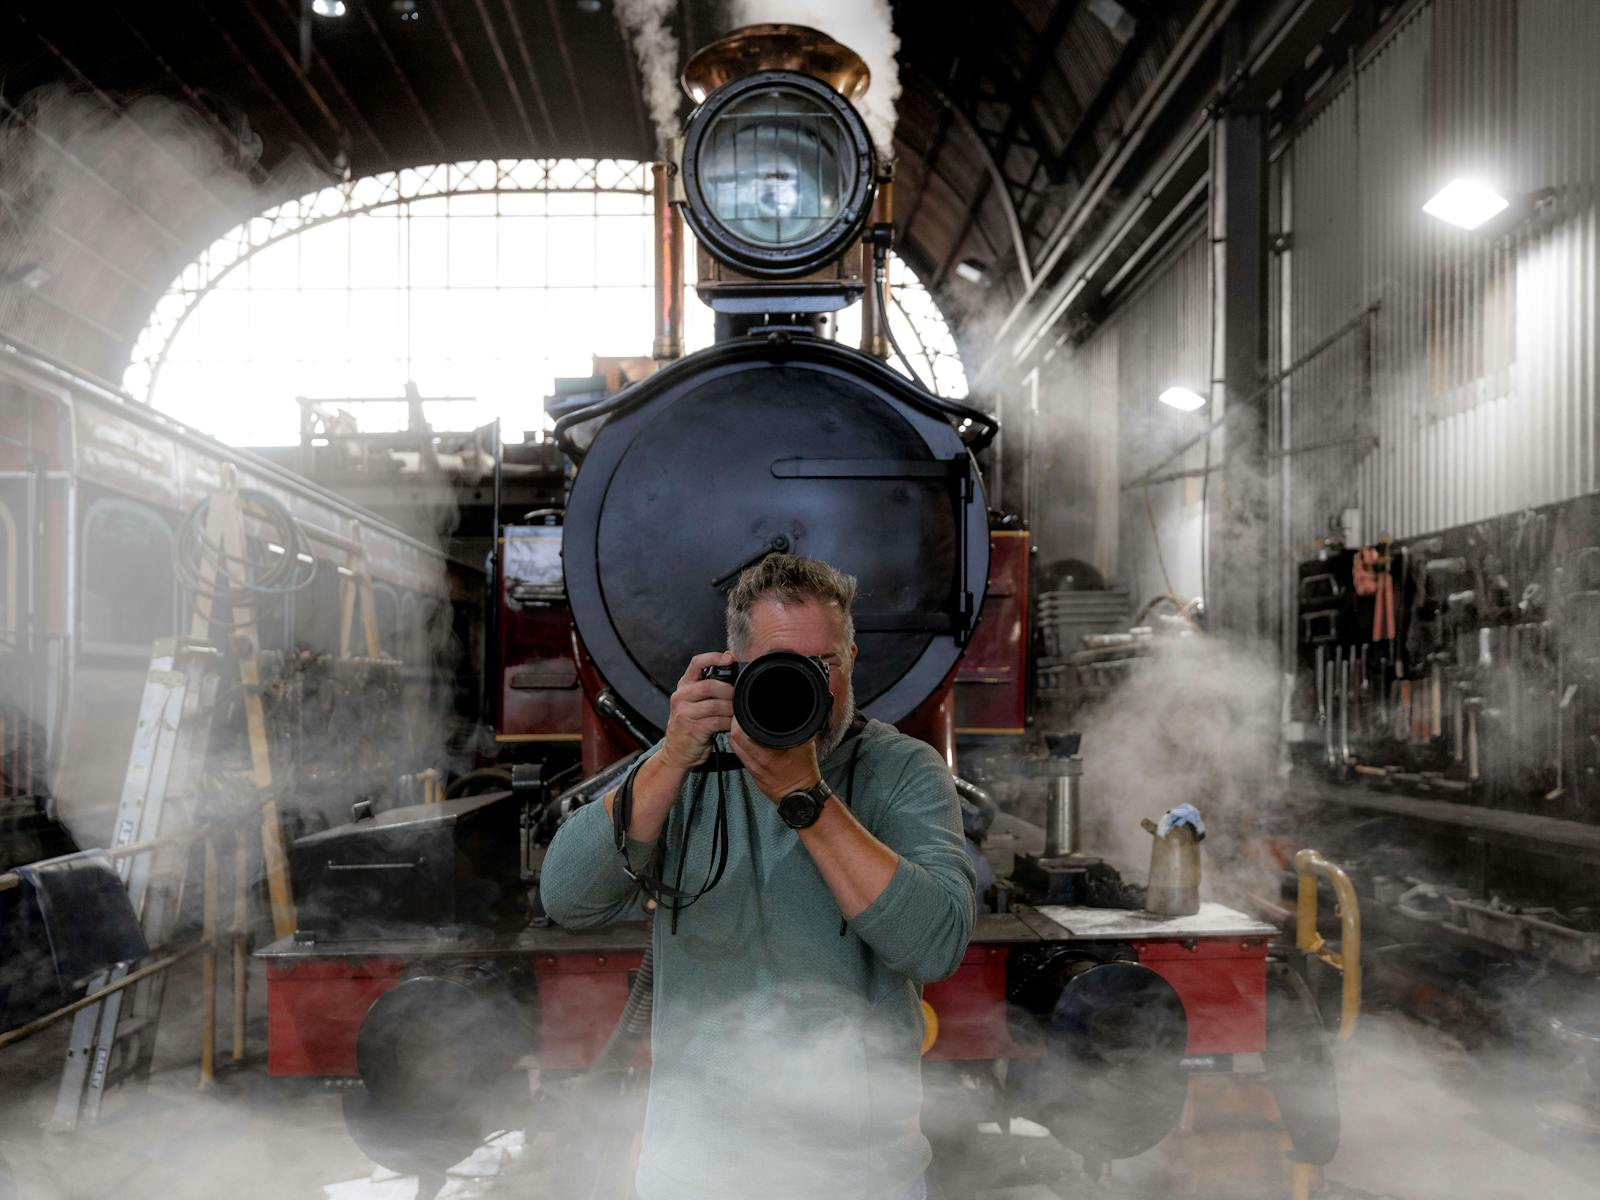 Cam Blake faces the camera with a DSLR camera held to his face. Behind him is a steam locomotive.